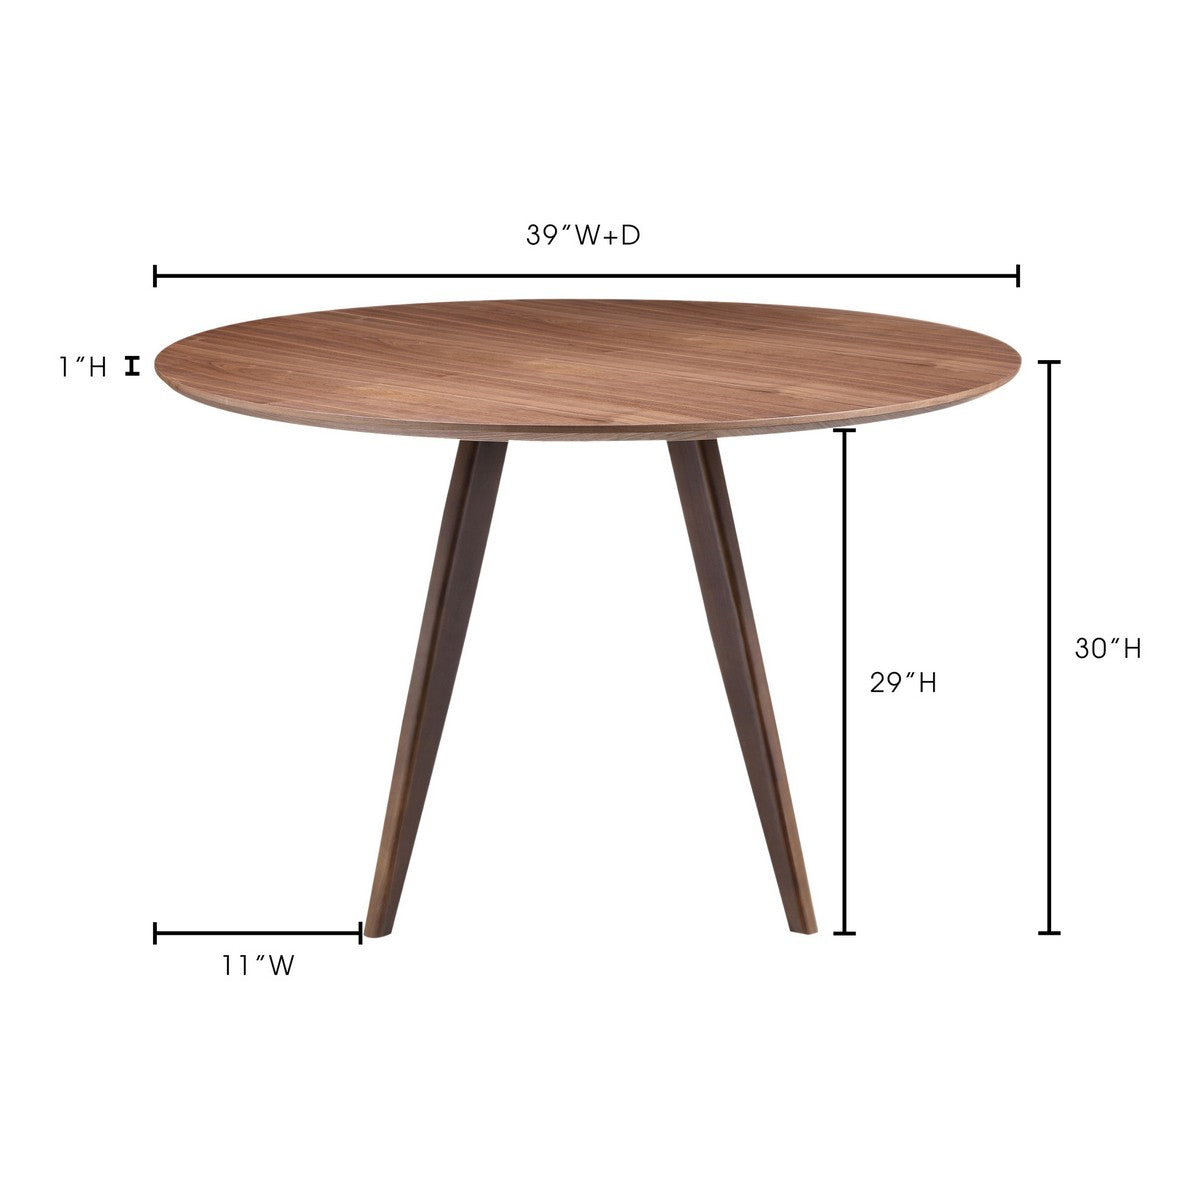 Moe's Home Collection Dover Dining Table Small Walnut - ER-1170-21